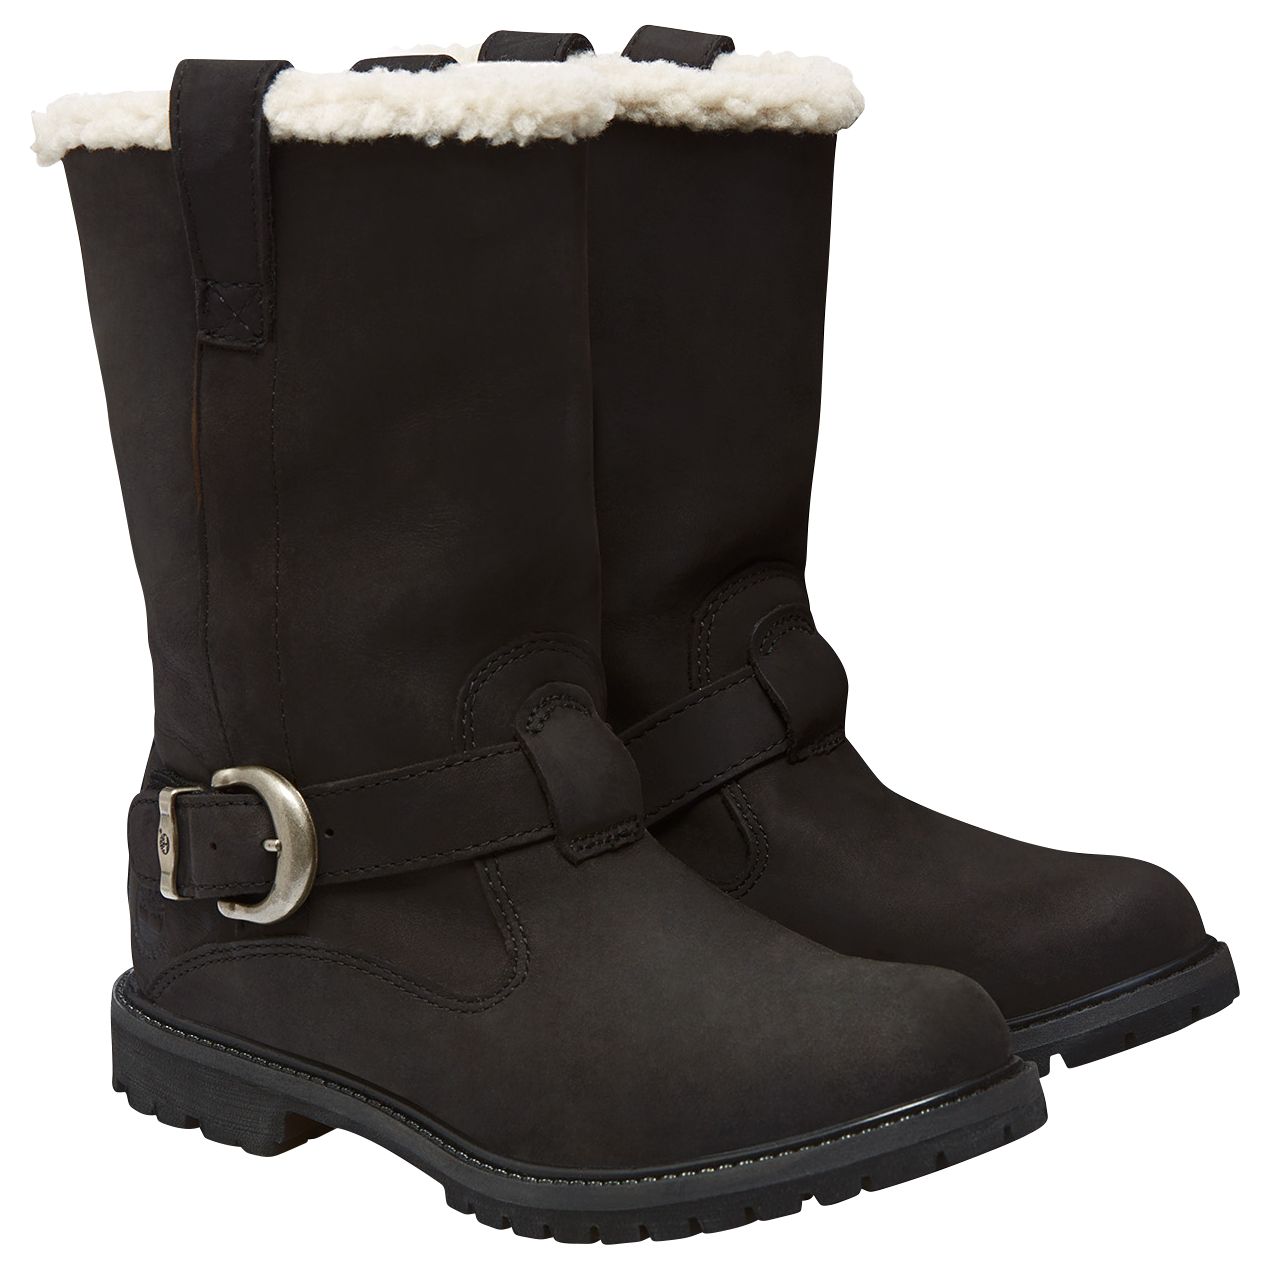 timberland black nellie pull on boots